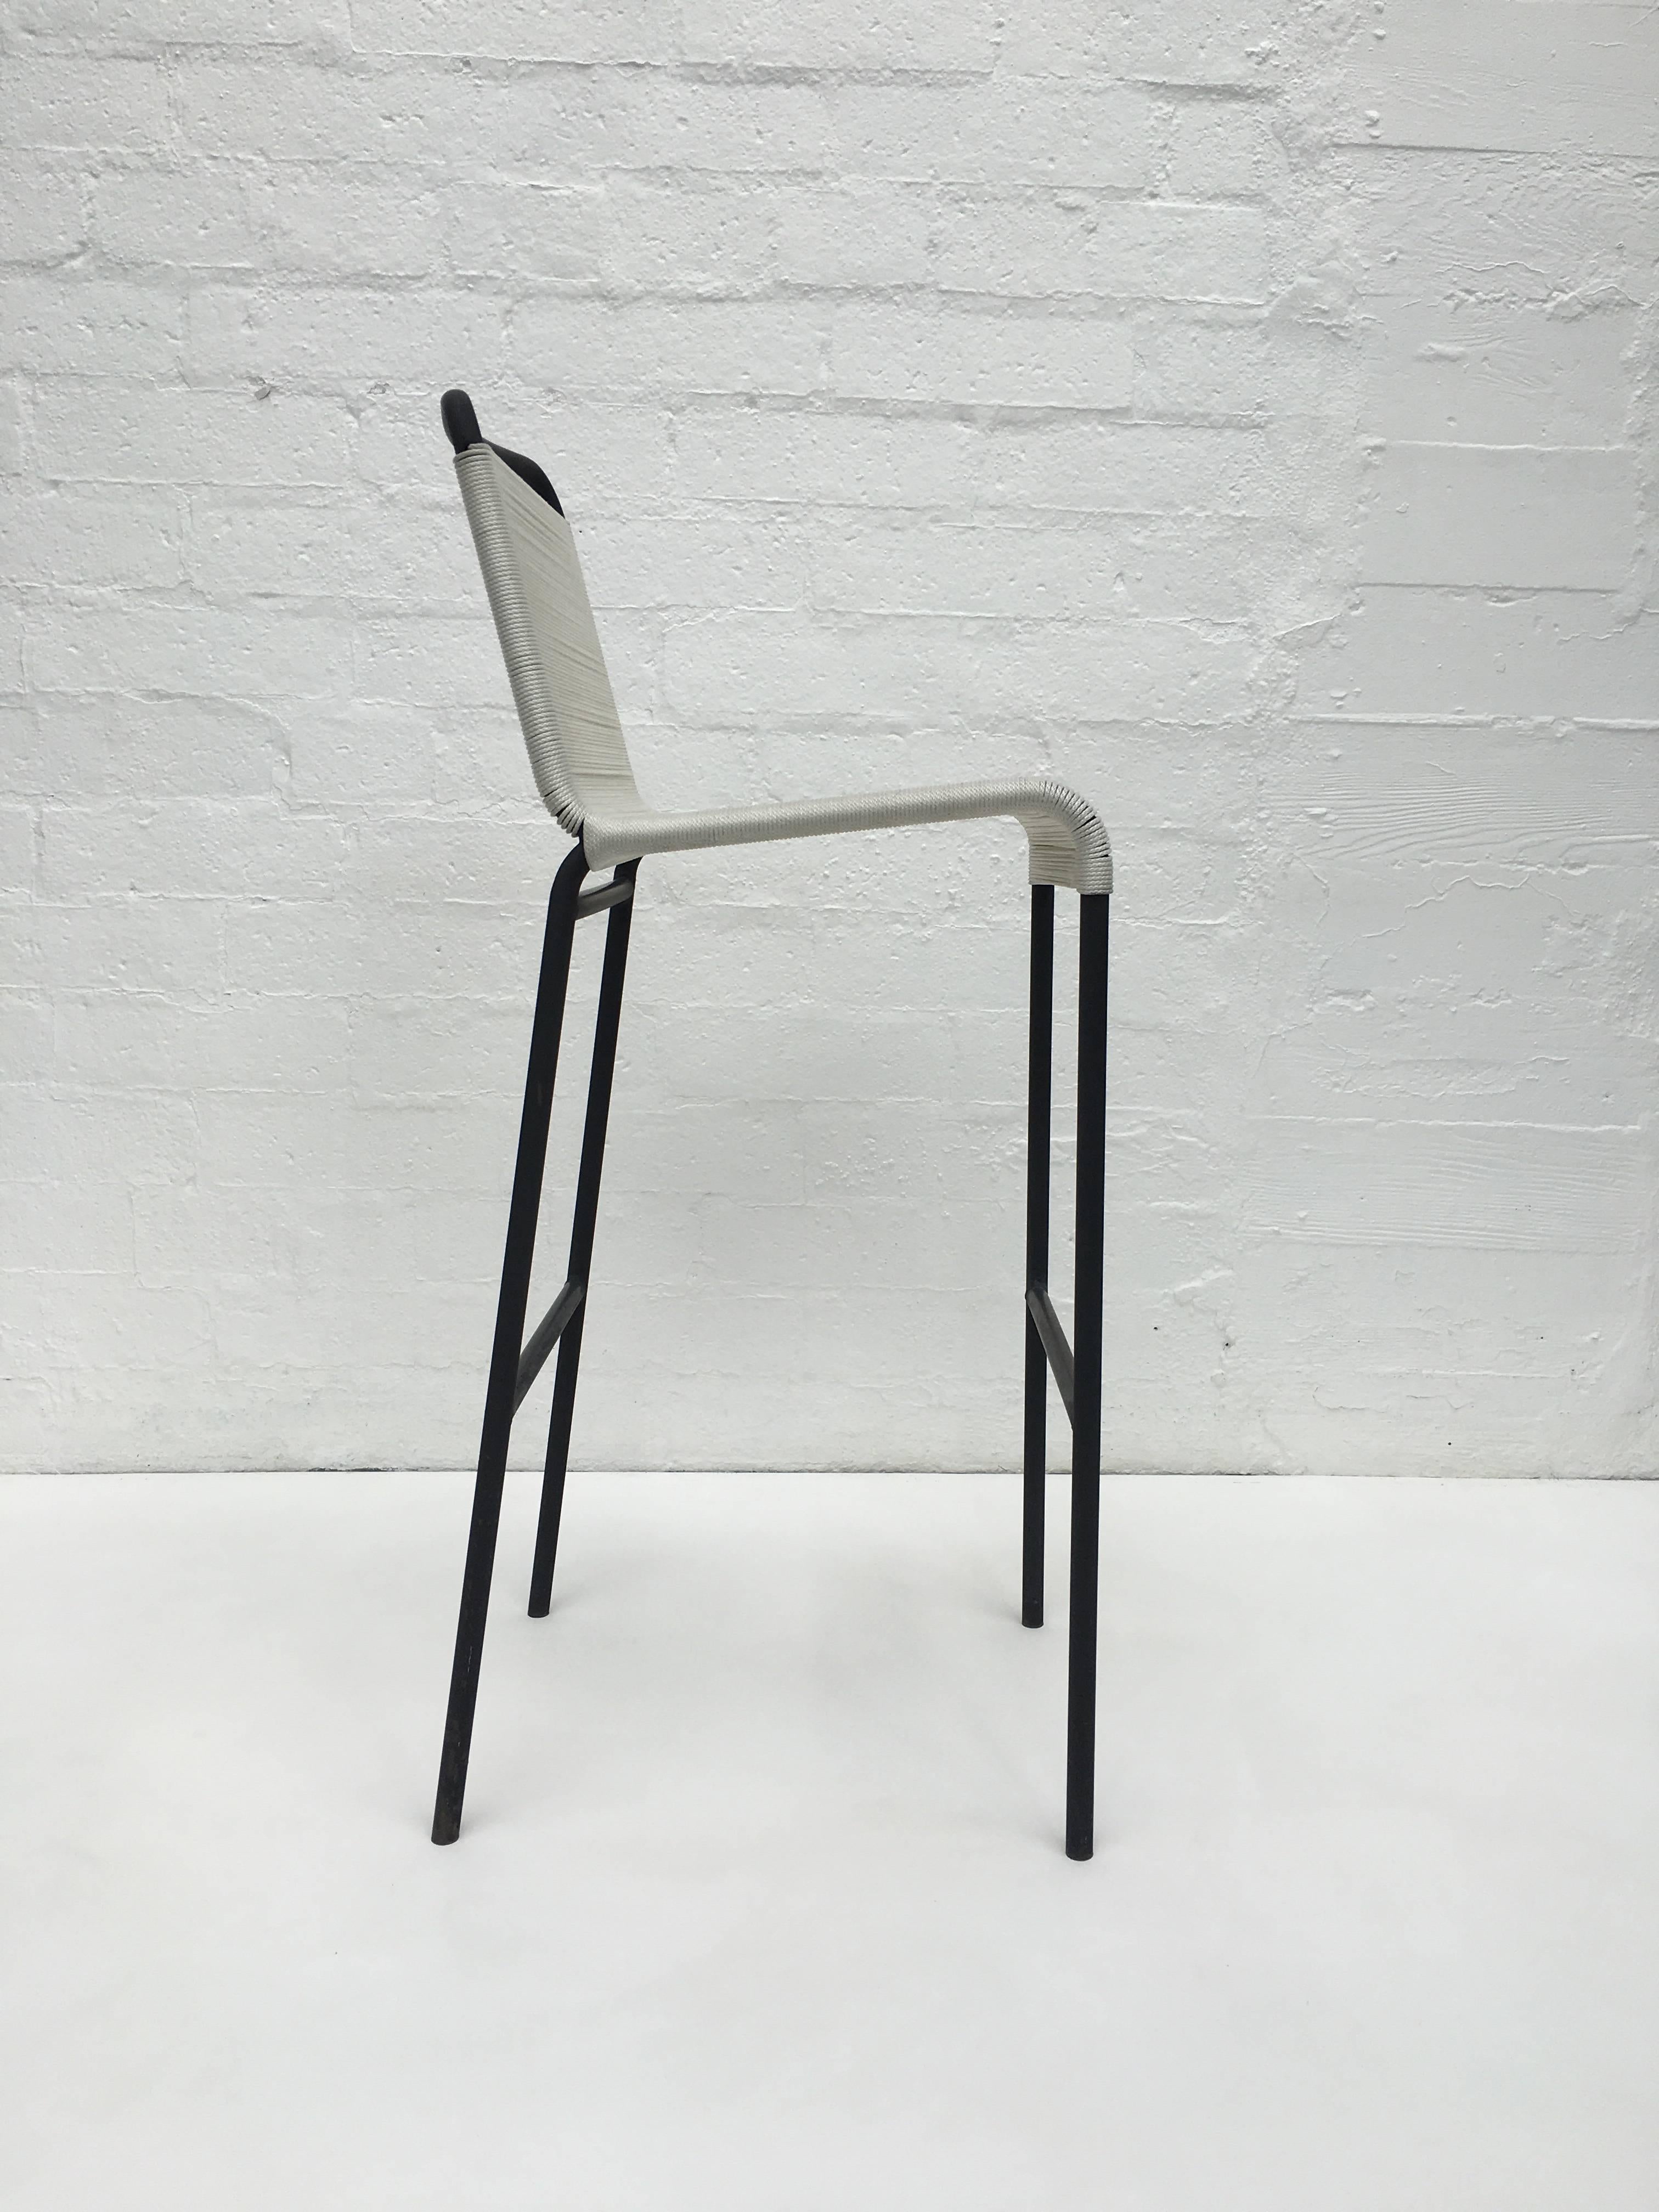 This rare California Modern design bar stools by Van Keppel and Taylor Green are in original condition. The string is in excellent condition but the black enamel paint shows some wear. This where purchased from original owner who purchased them in